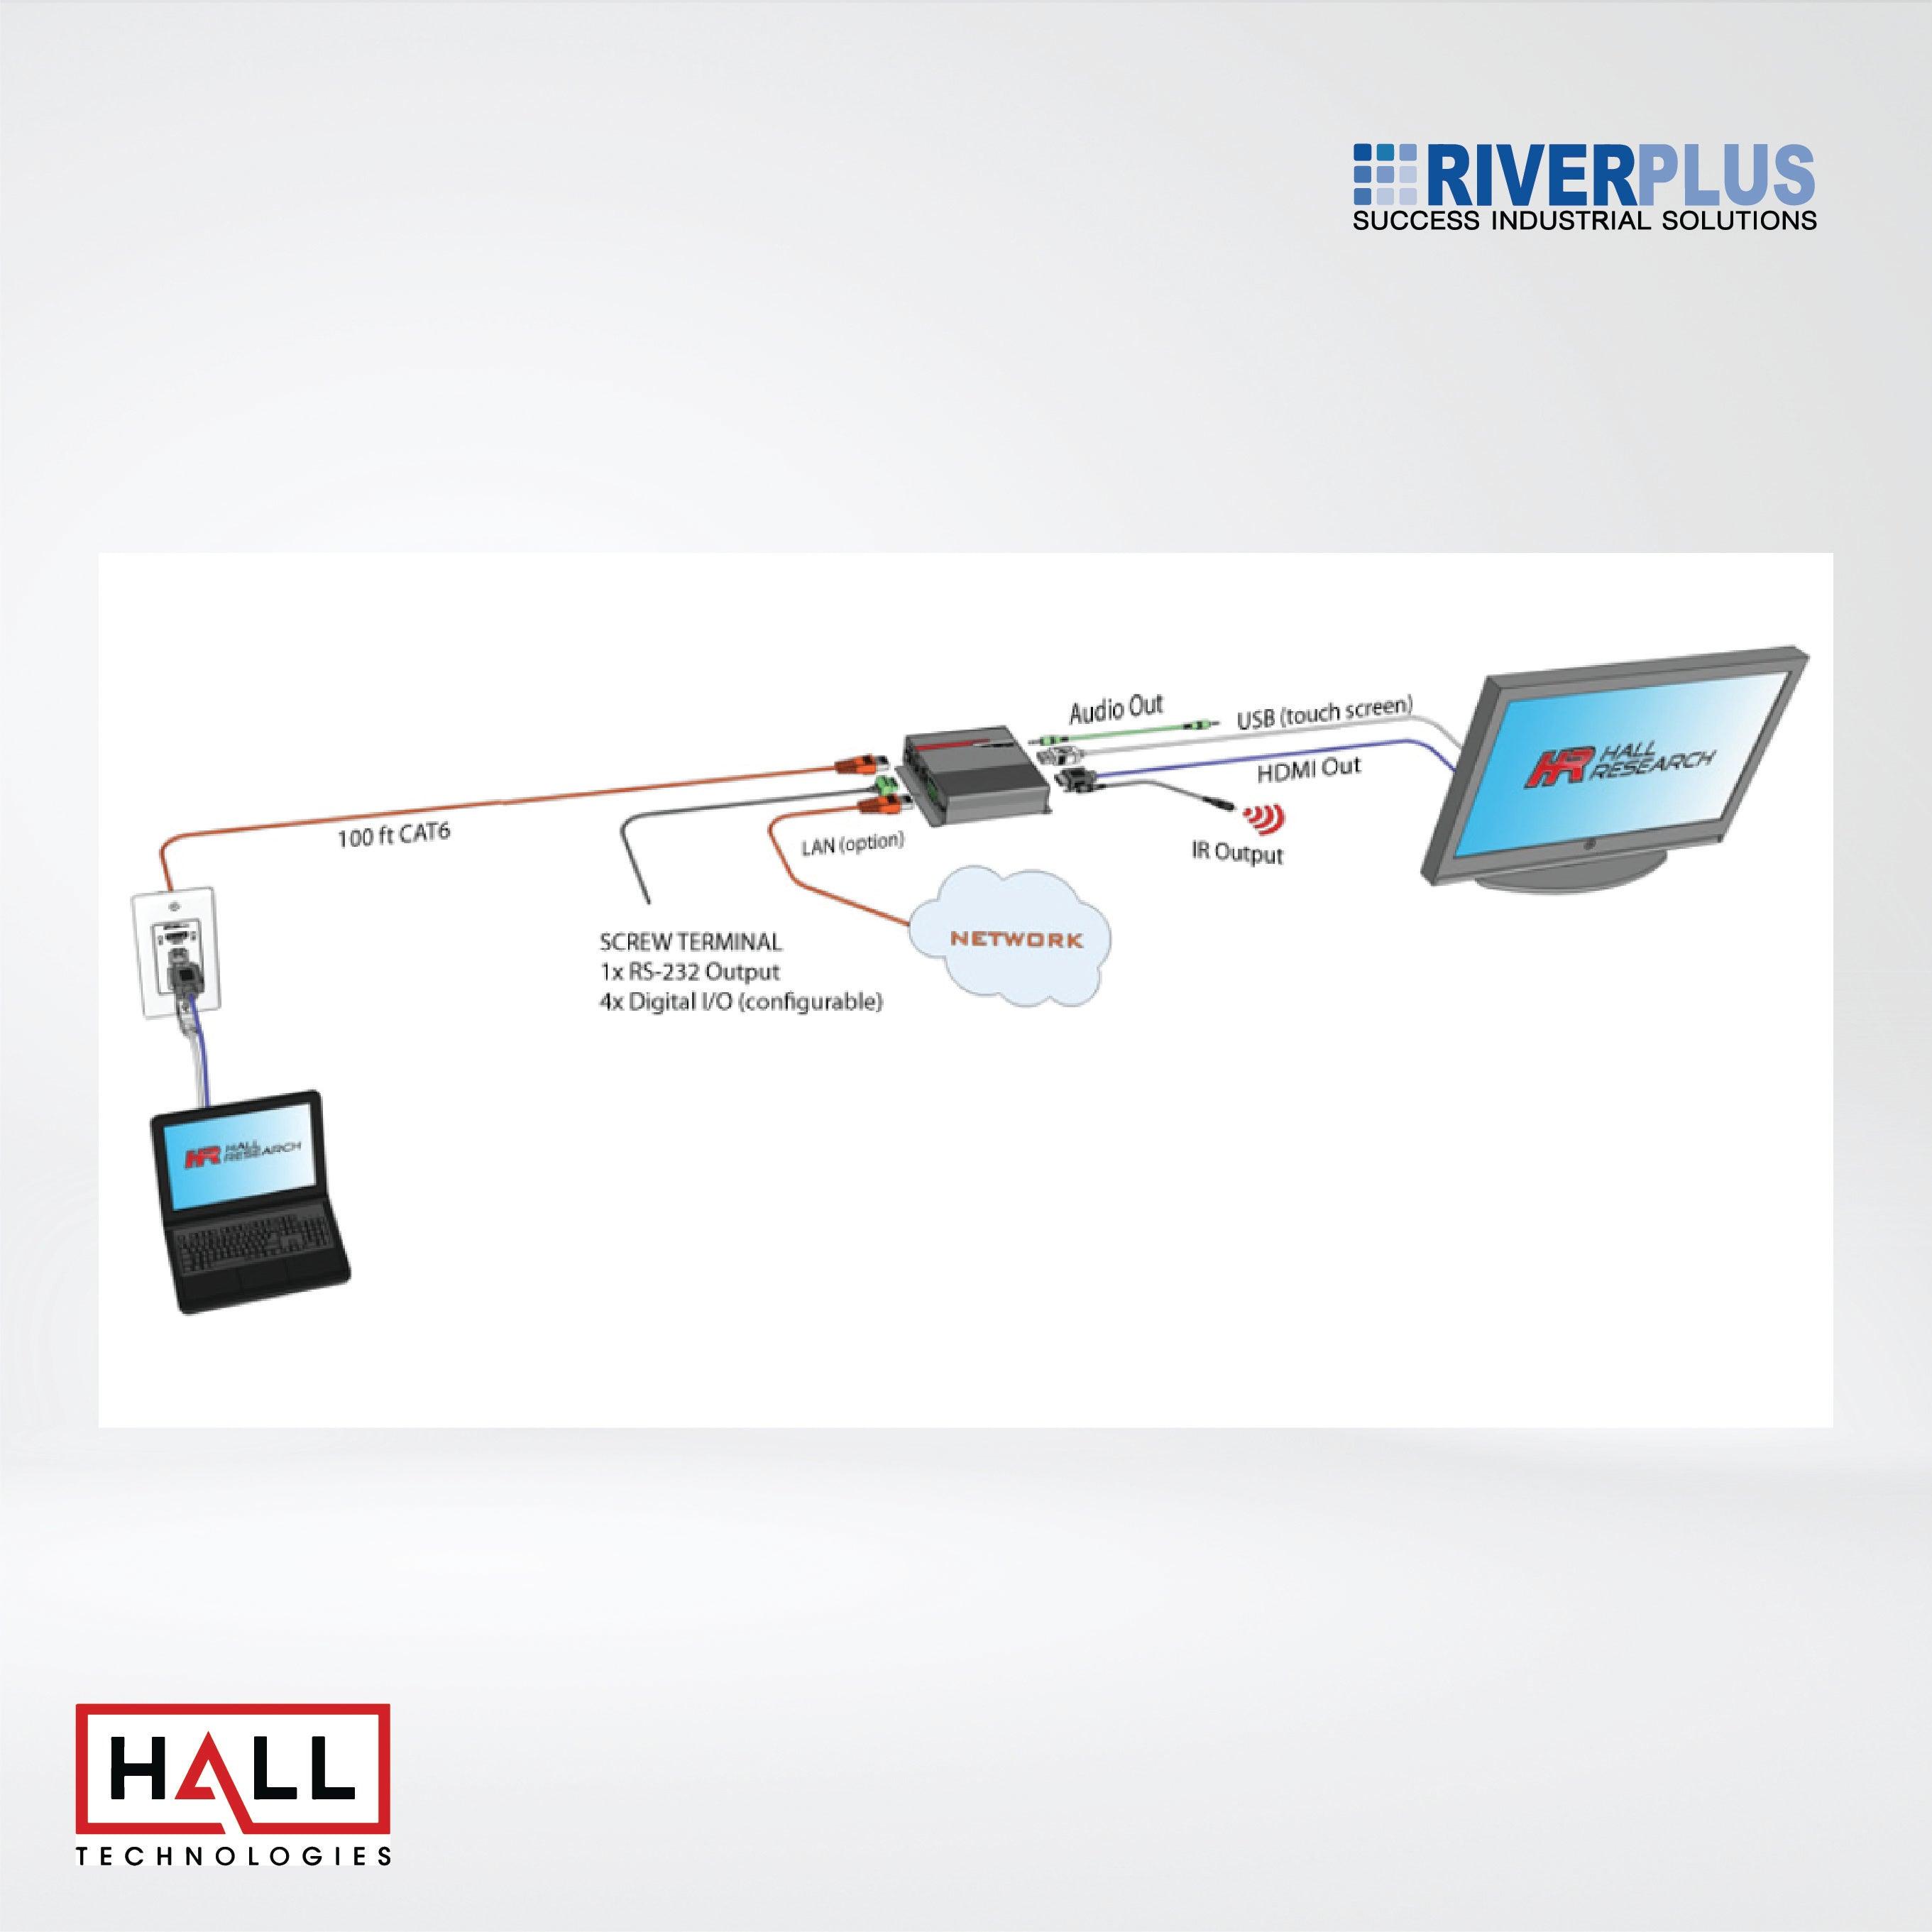 EX-VU1 HDMI and USB Extension with Audio and Control - Riverplus